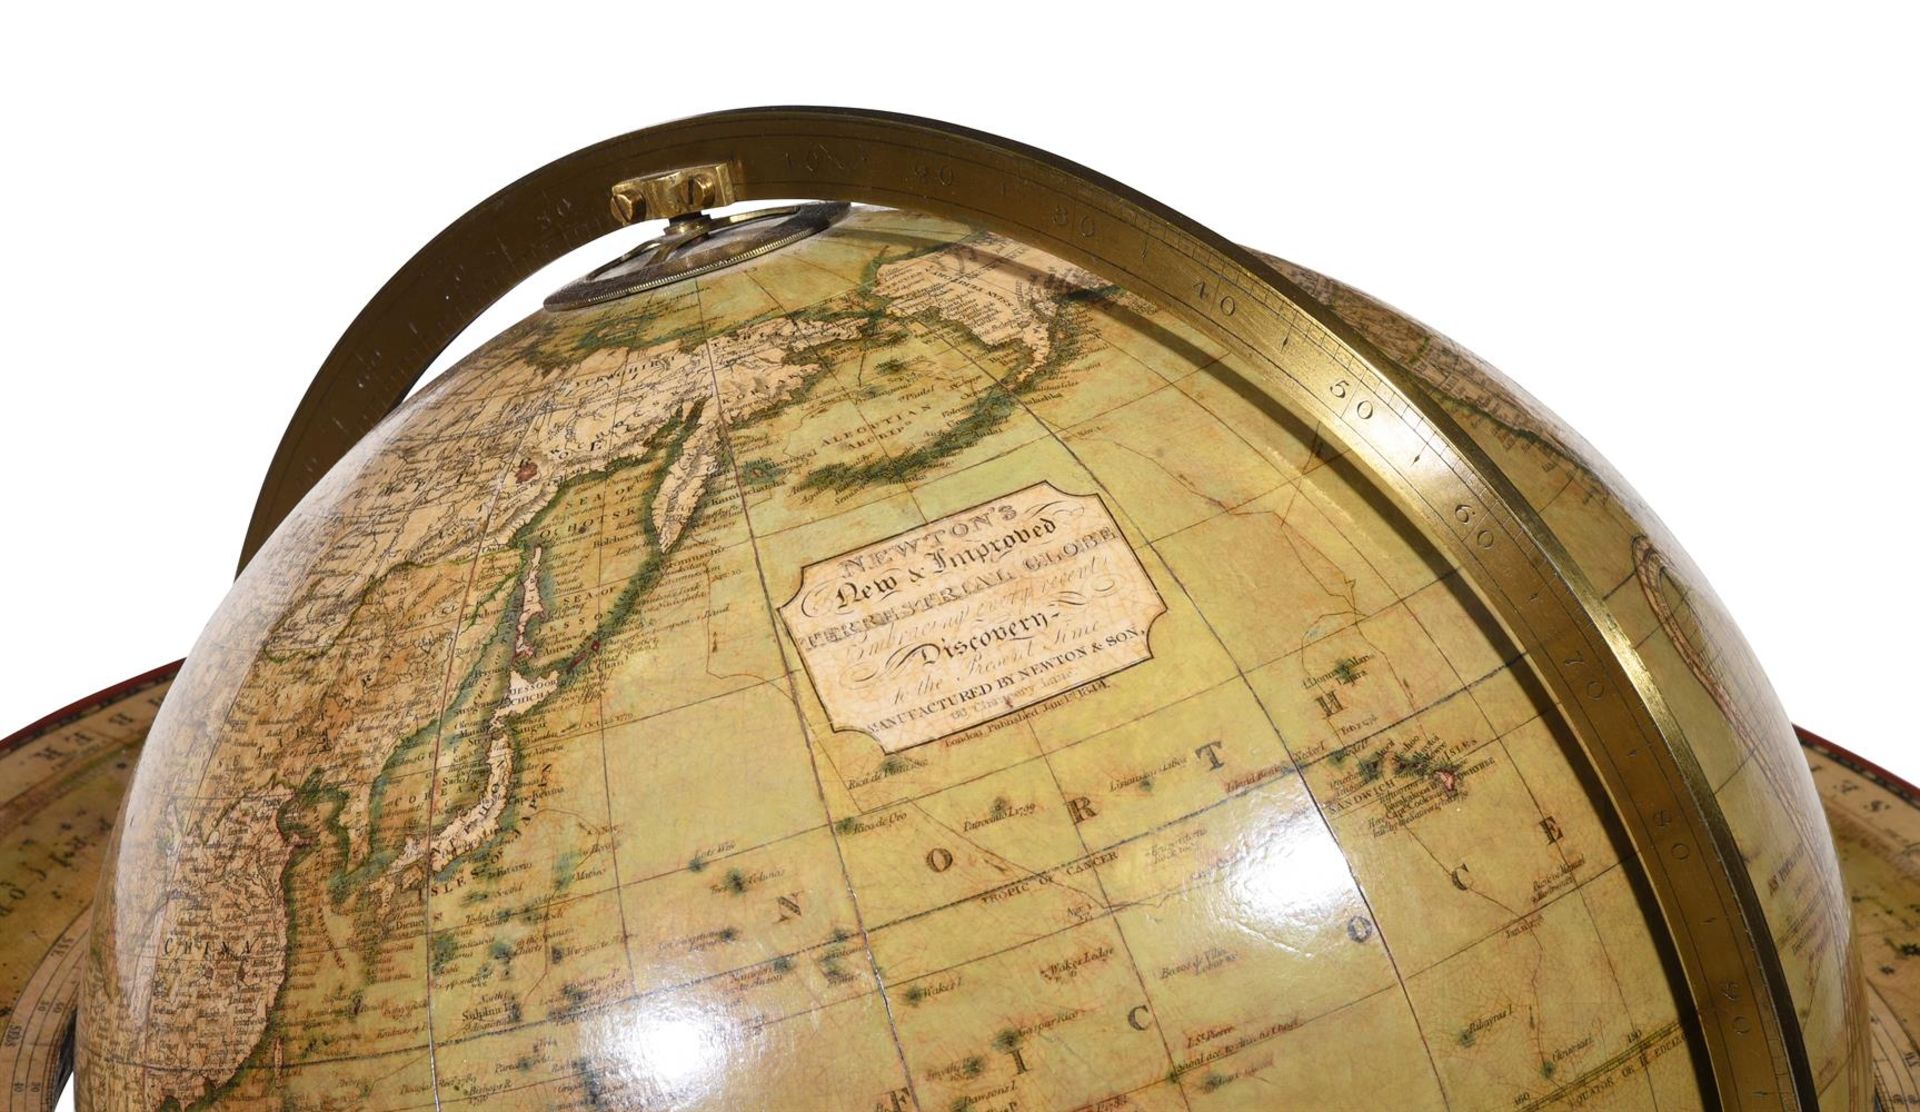 Y A PAIR OF TERRESTRIAL AND CELESTIAL 12 INCH LIBRARY GLOBES ON ROSEWOOD STANDS, BY NEWTON & SON - Image 4 of 7